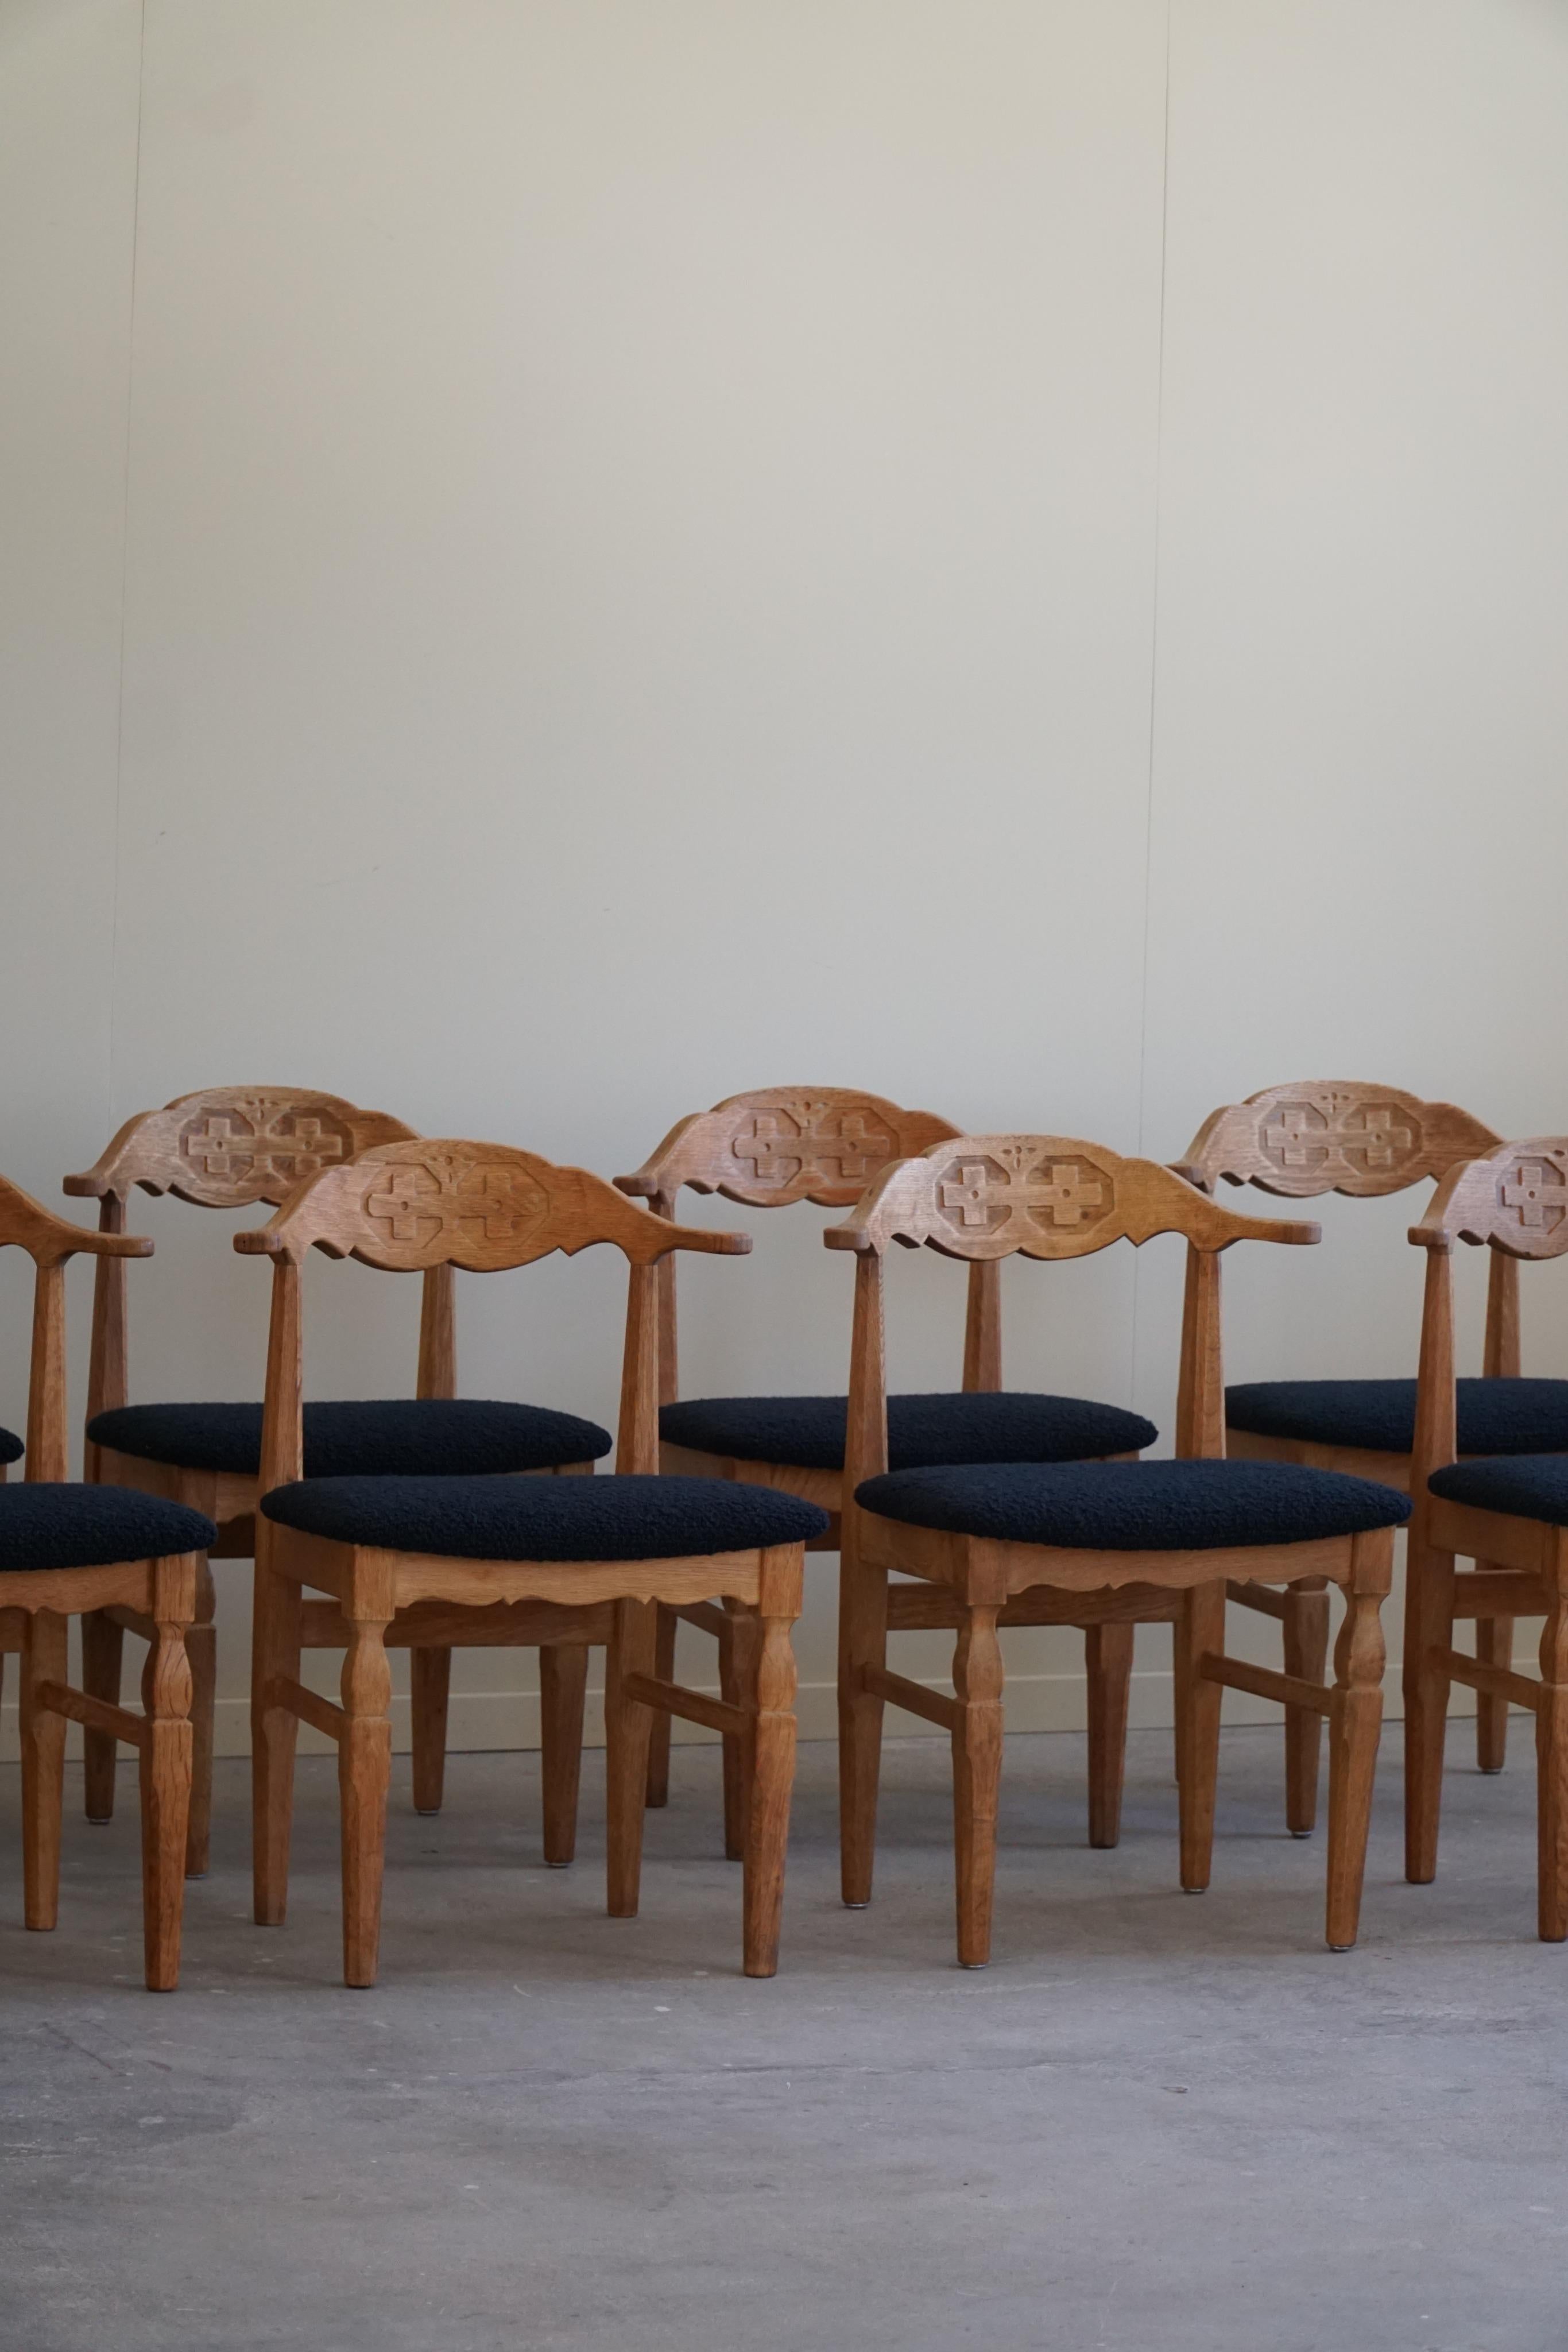 Such a magnificent set of 8 dining chairs in oak, seats reupholstered in great quality coal bouclé.
Designed by Henning Kjærnulf for E.G. Møbler - circa 1960s.

The overall impression of these midcentury chairs are really good.
This set will